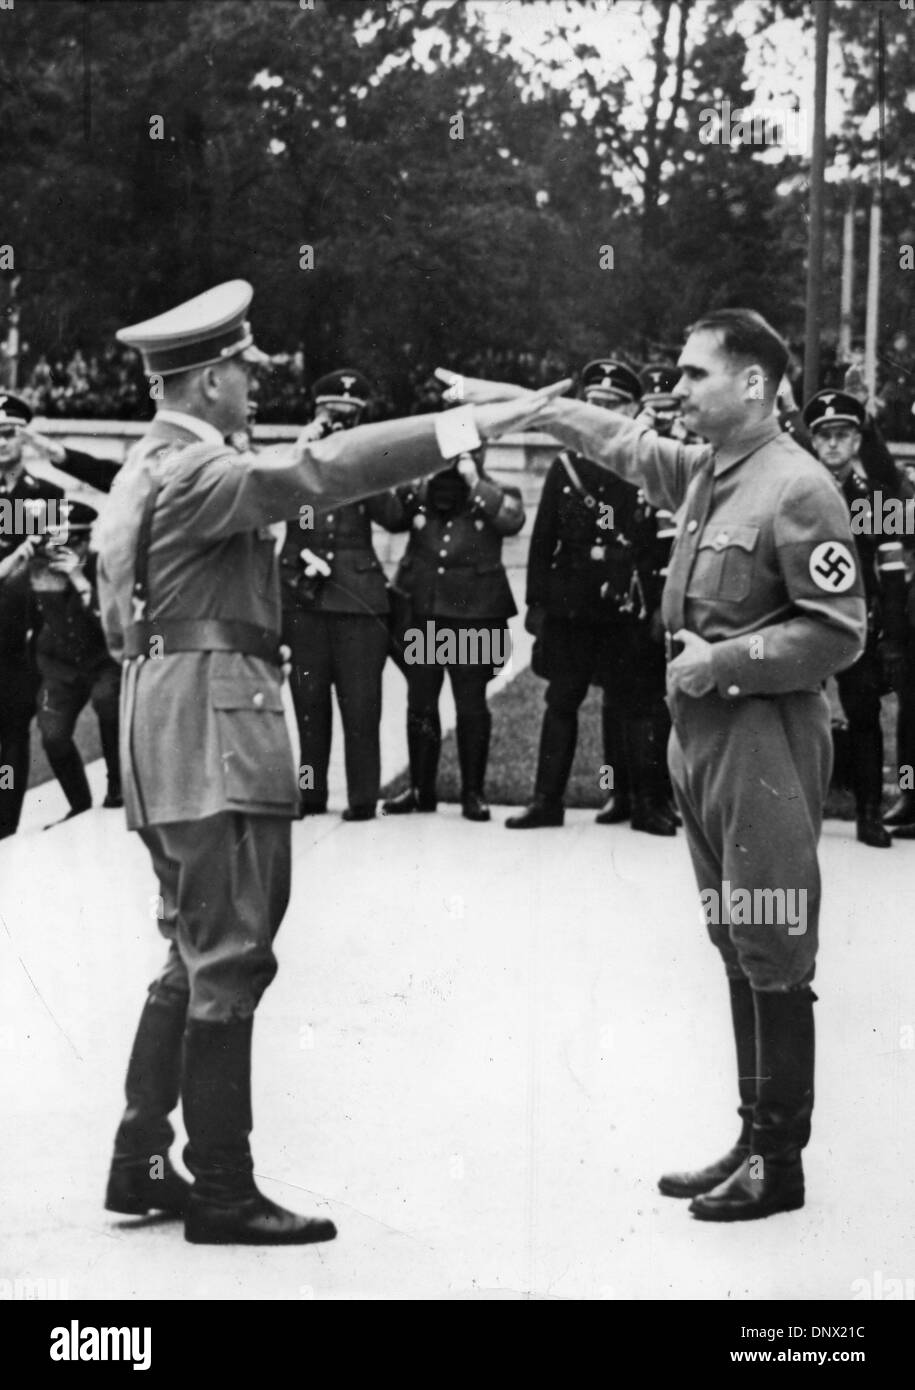 July 9, 1938 - Nuremberg, Germany - HERR RUDOLF HESS (R), Adolf Hitler's Deputy, greets the Fuehrer ADOLF HITLER with the Nazi salute, when the latter arrived at the Congress Hall in Nuremberg for the opening of the 10th Nations Socialist Party rally. Hess opened the rally. (Credit Image: © KEYSTONE Pictures USA/ZUMAPRESS.com) Stock Photo